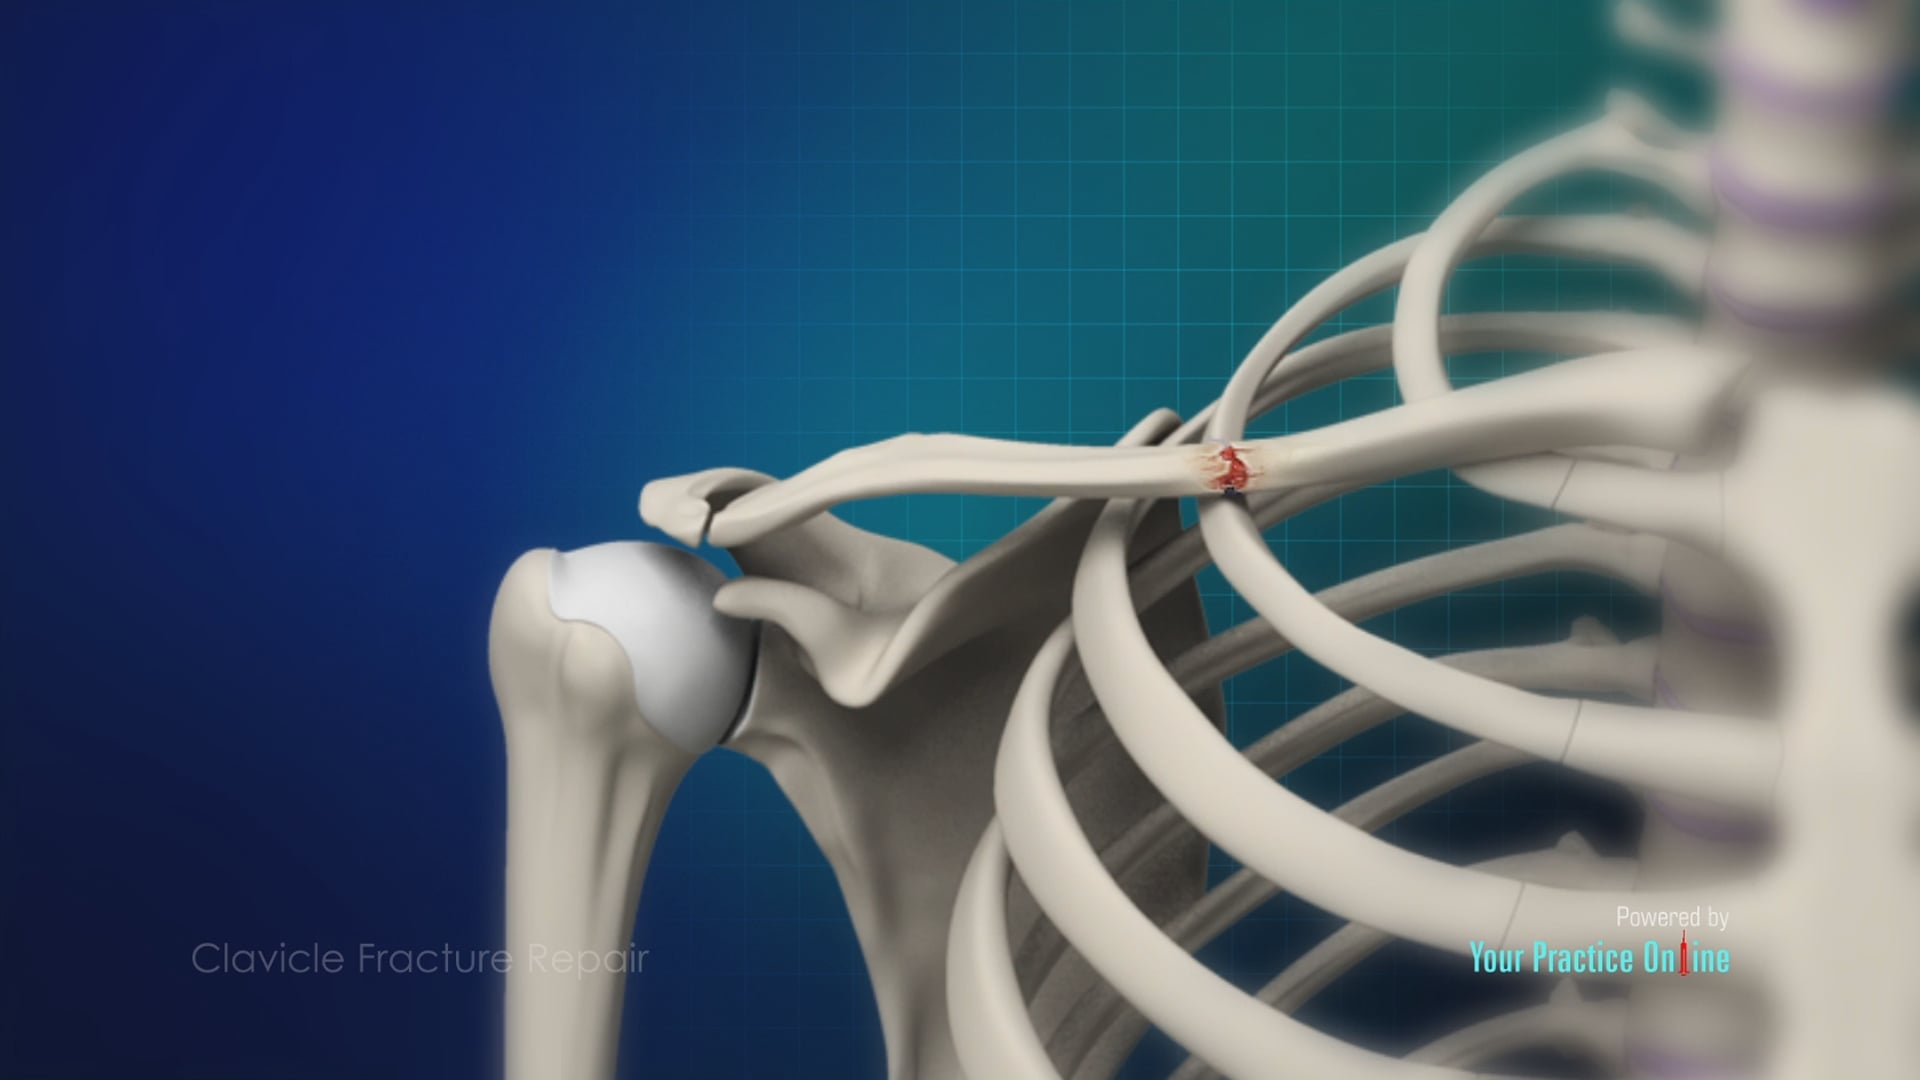 Clavicle Fracture Video | Medical Video Library